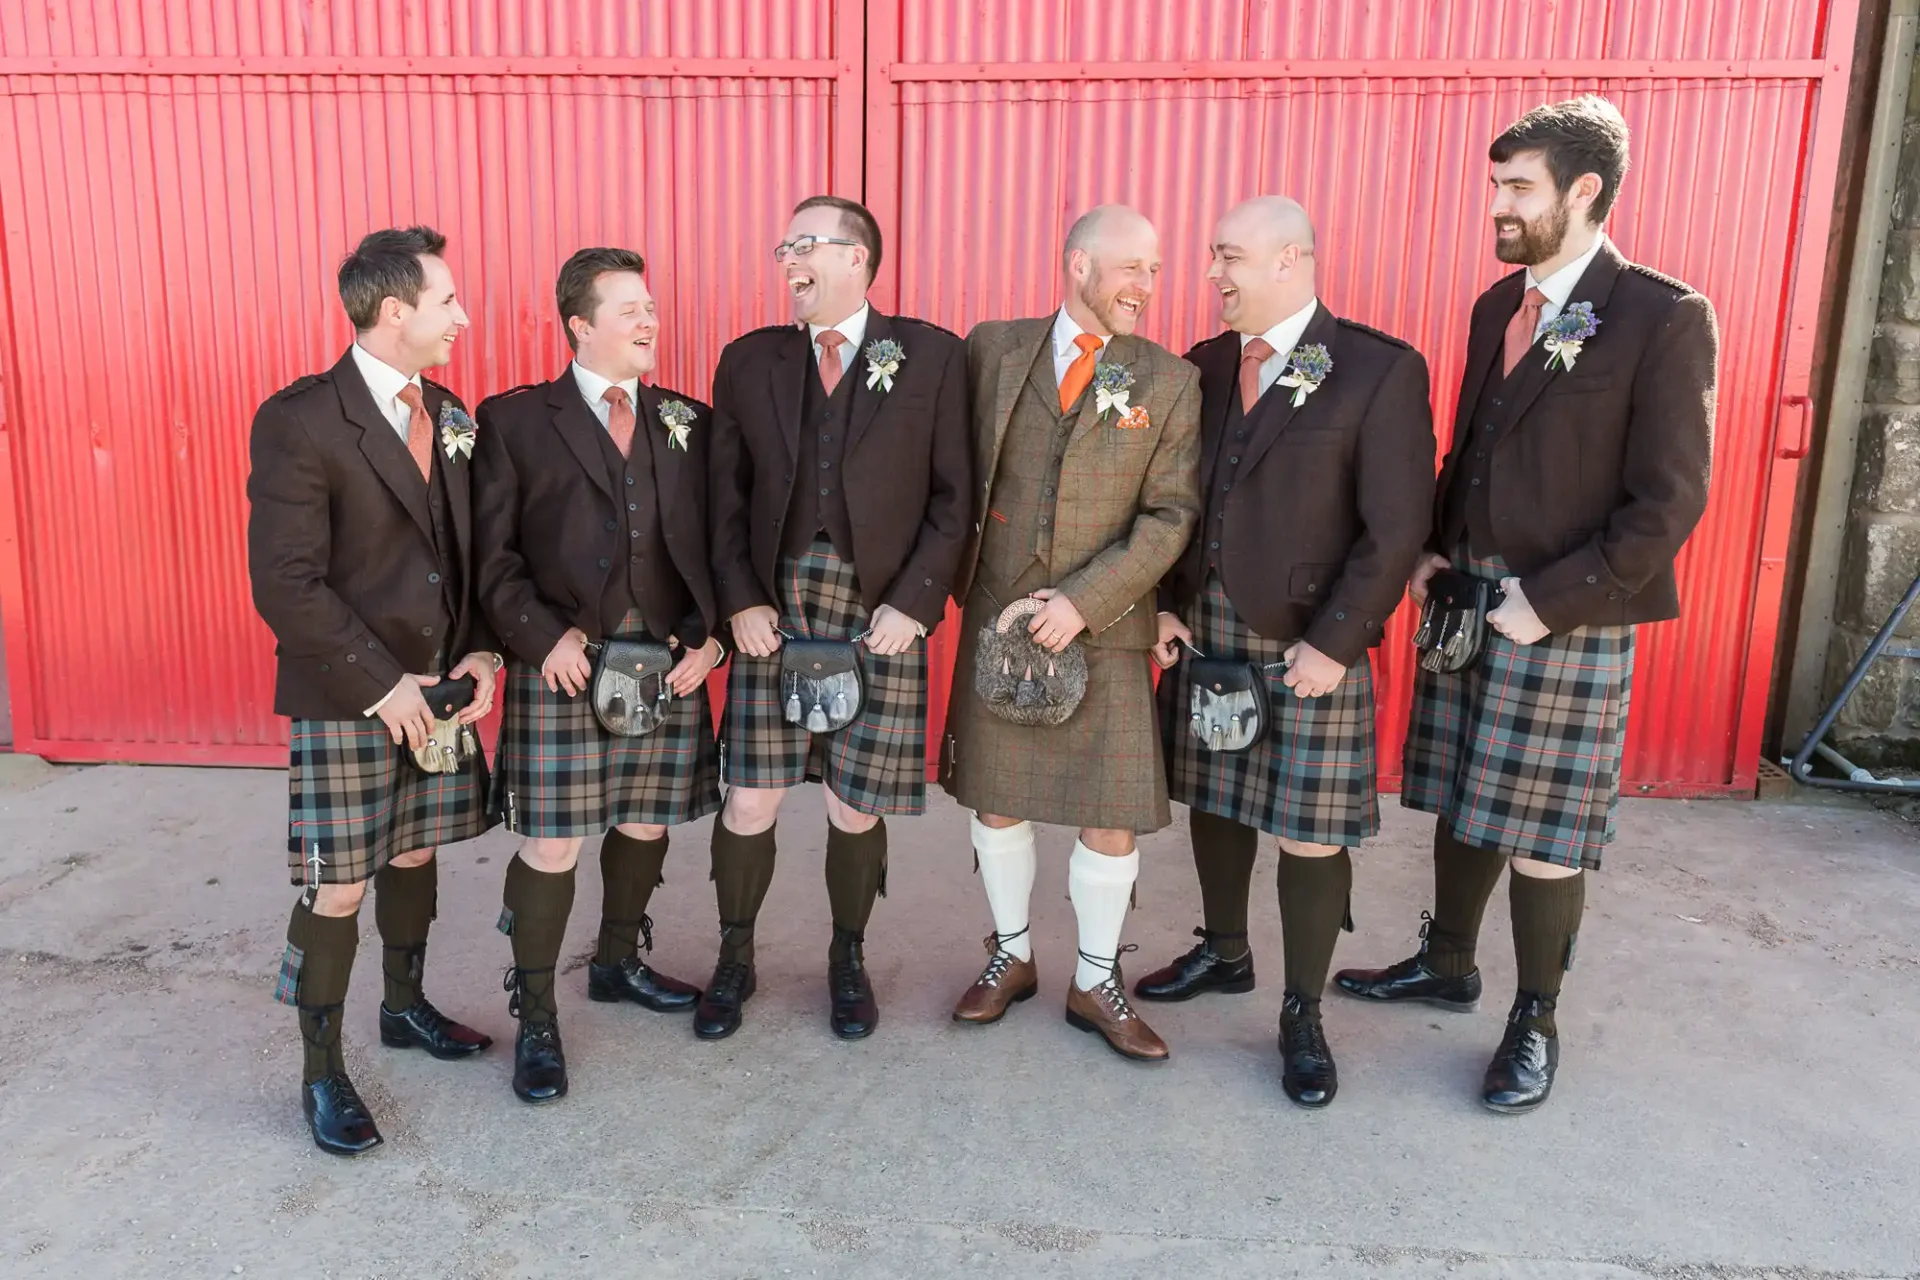 Six men in traditional scottish kilts and jackets, laughing together in front of a red barn door.